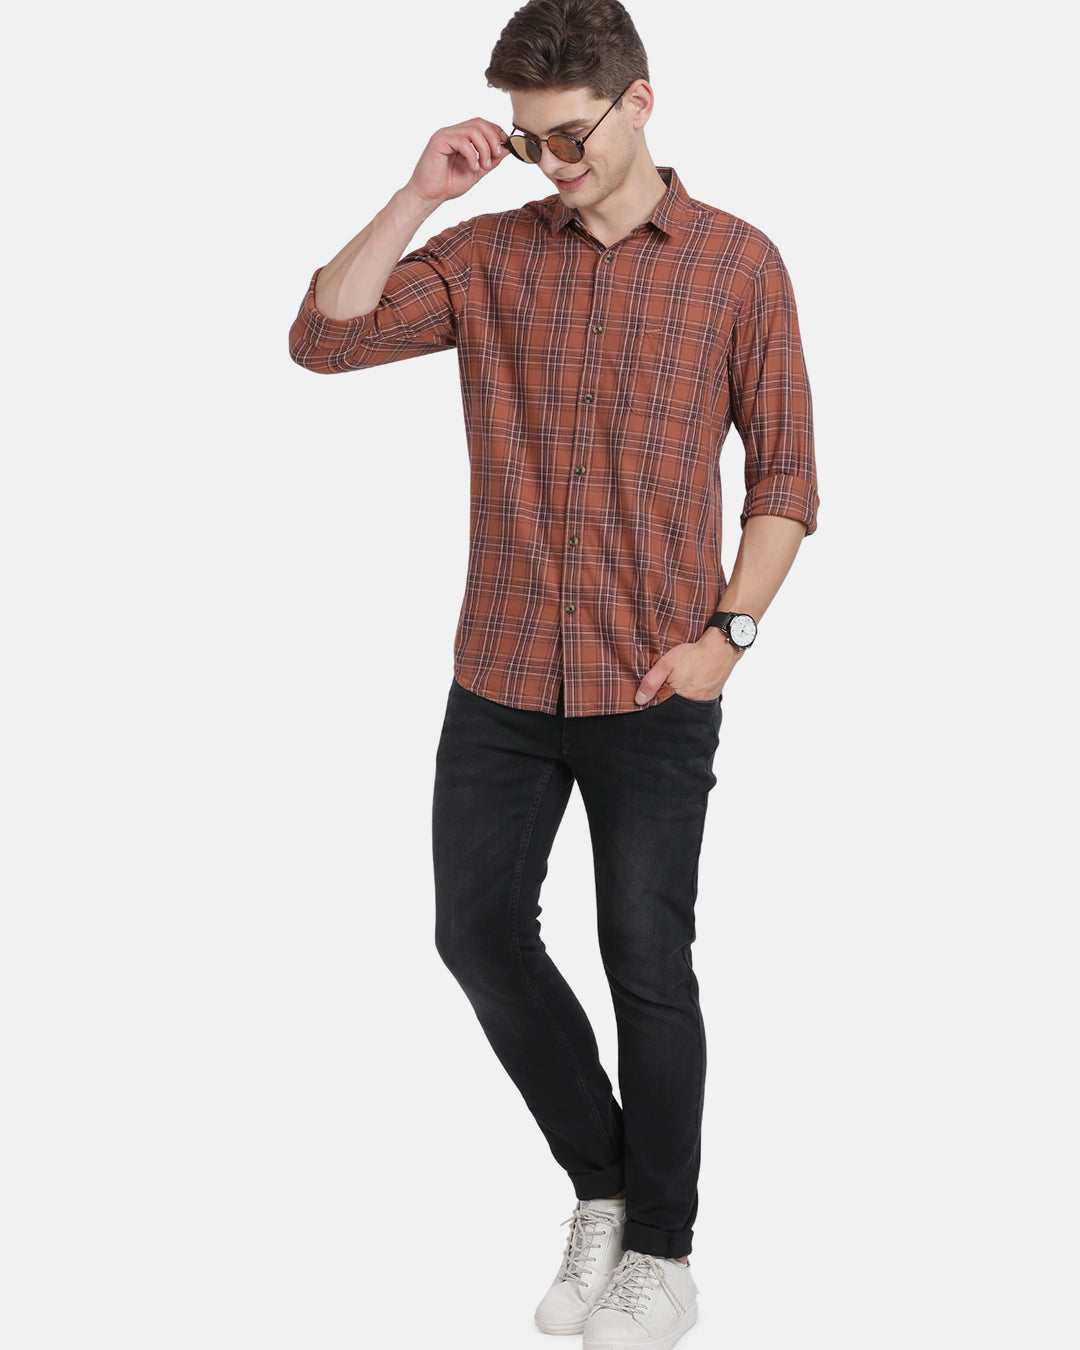 Casual Full Sleeve Slim Fit Checks Brown with Collar Shirt for Men